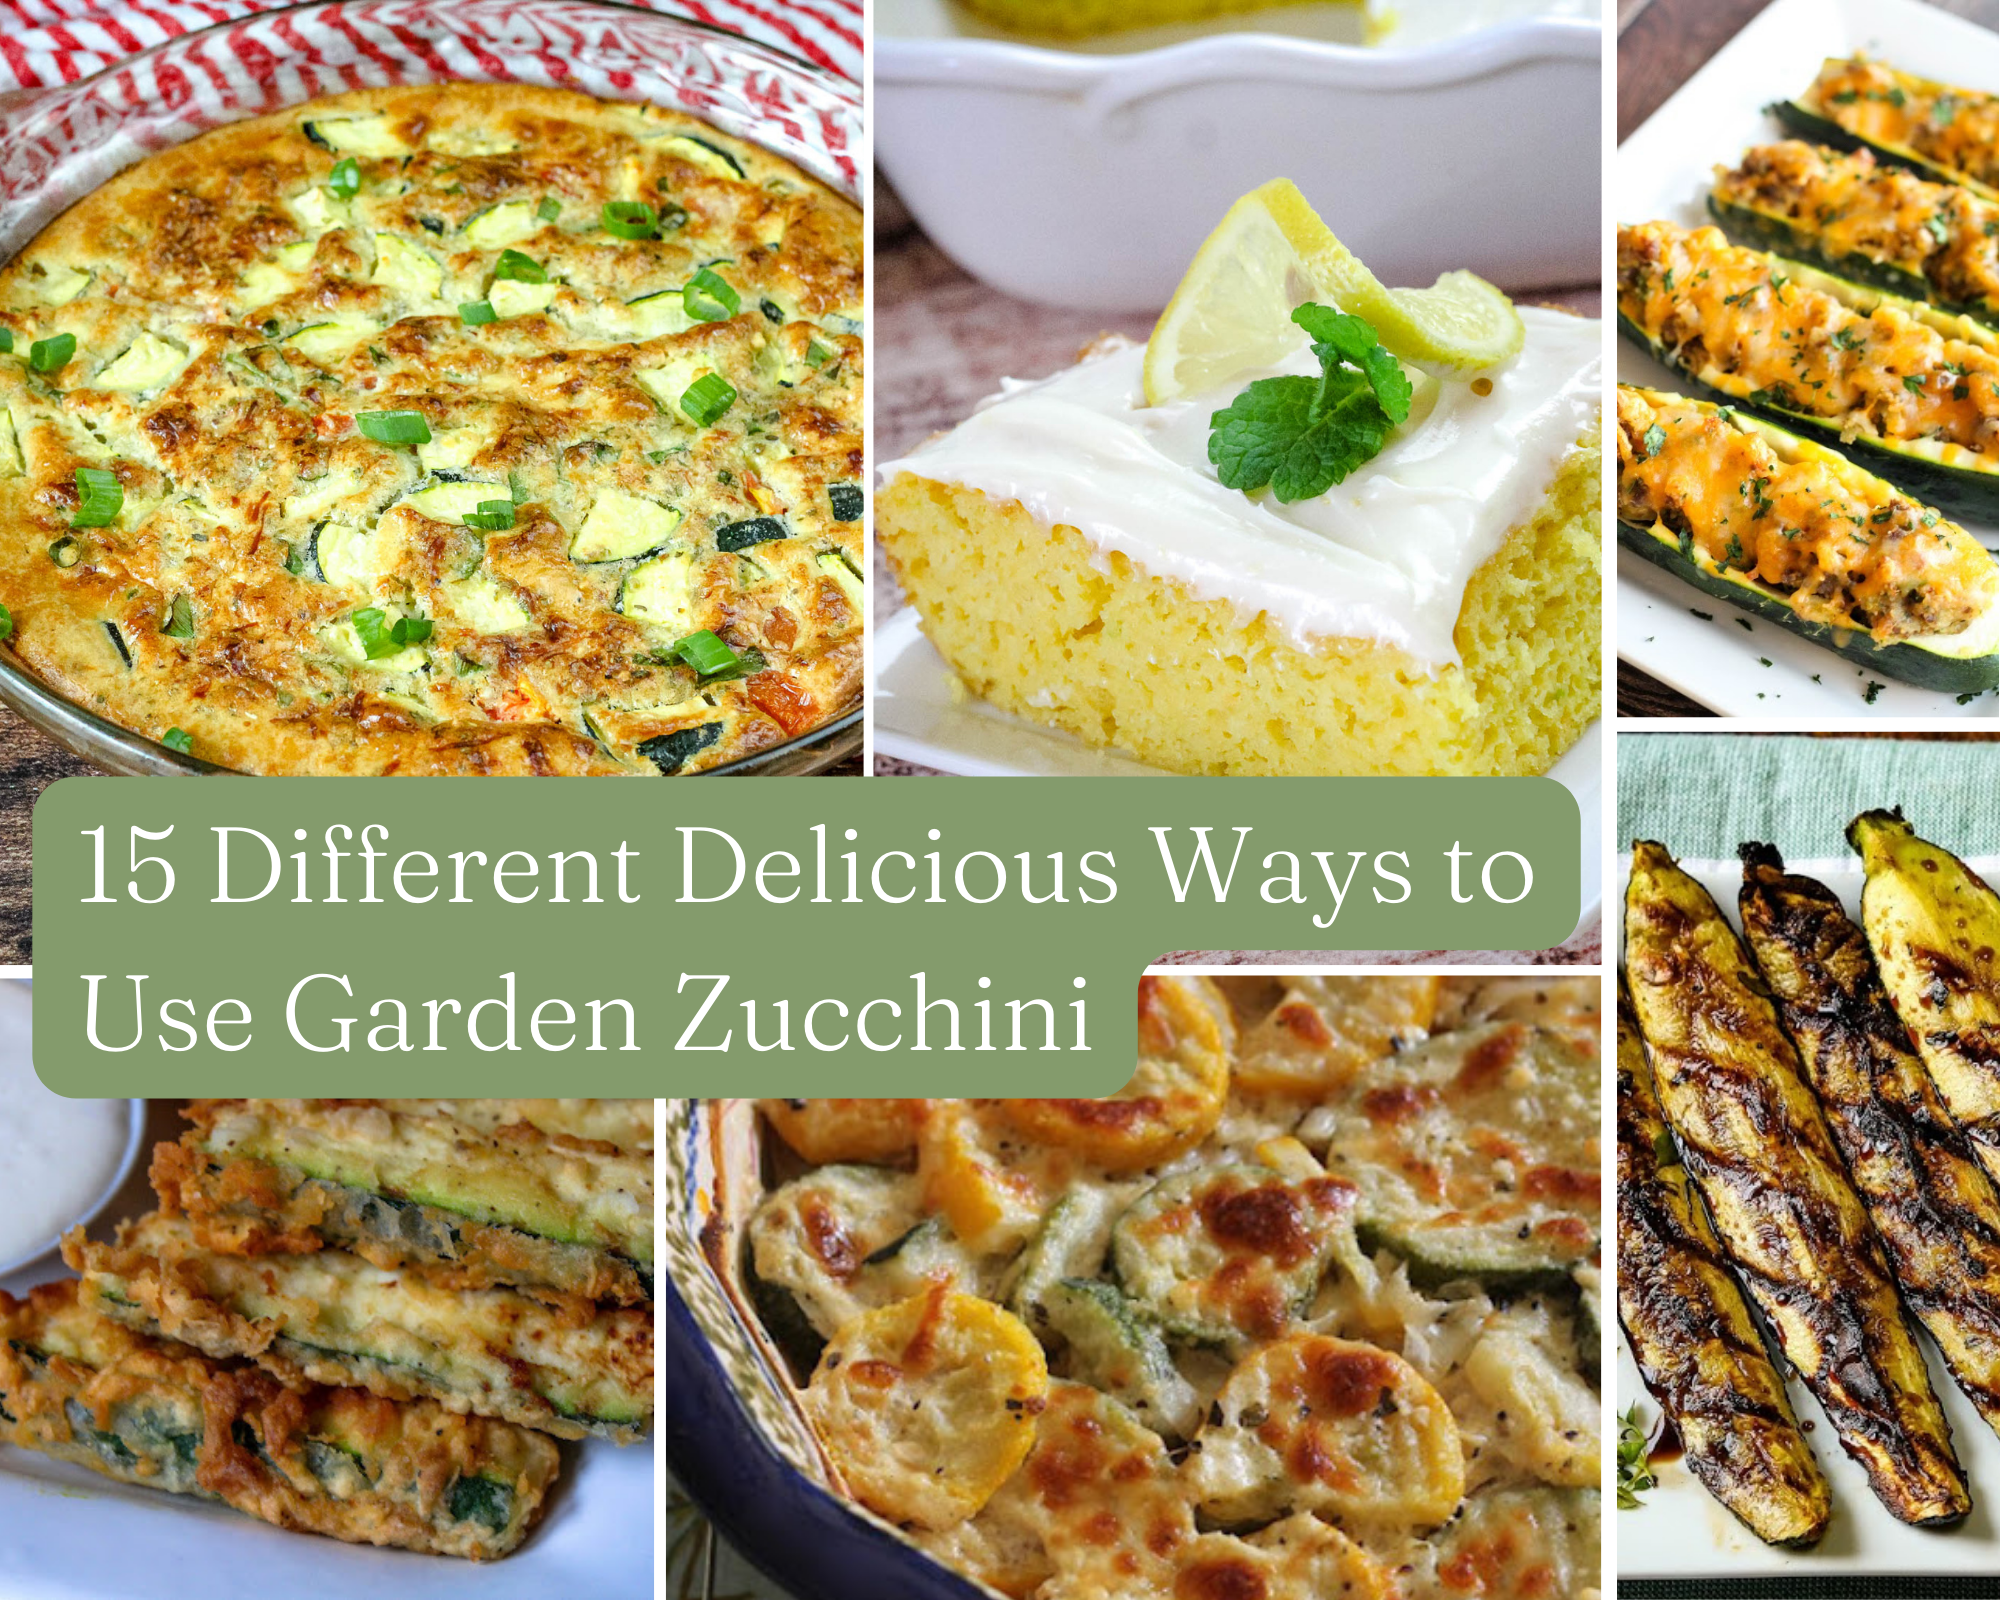 15 Different Delicious Ways to Use Garden Zucchini